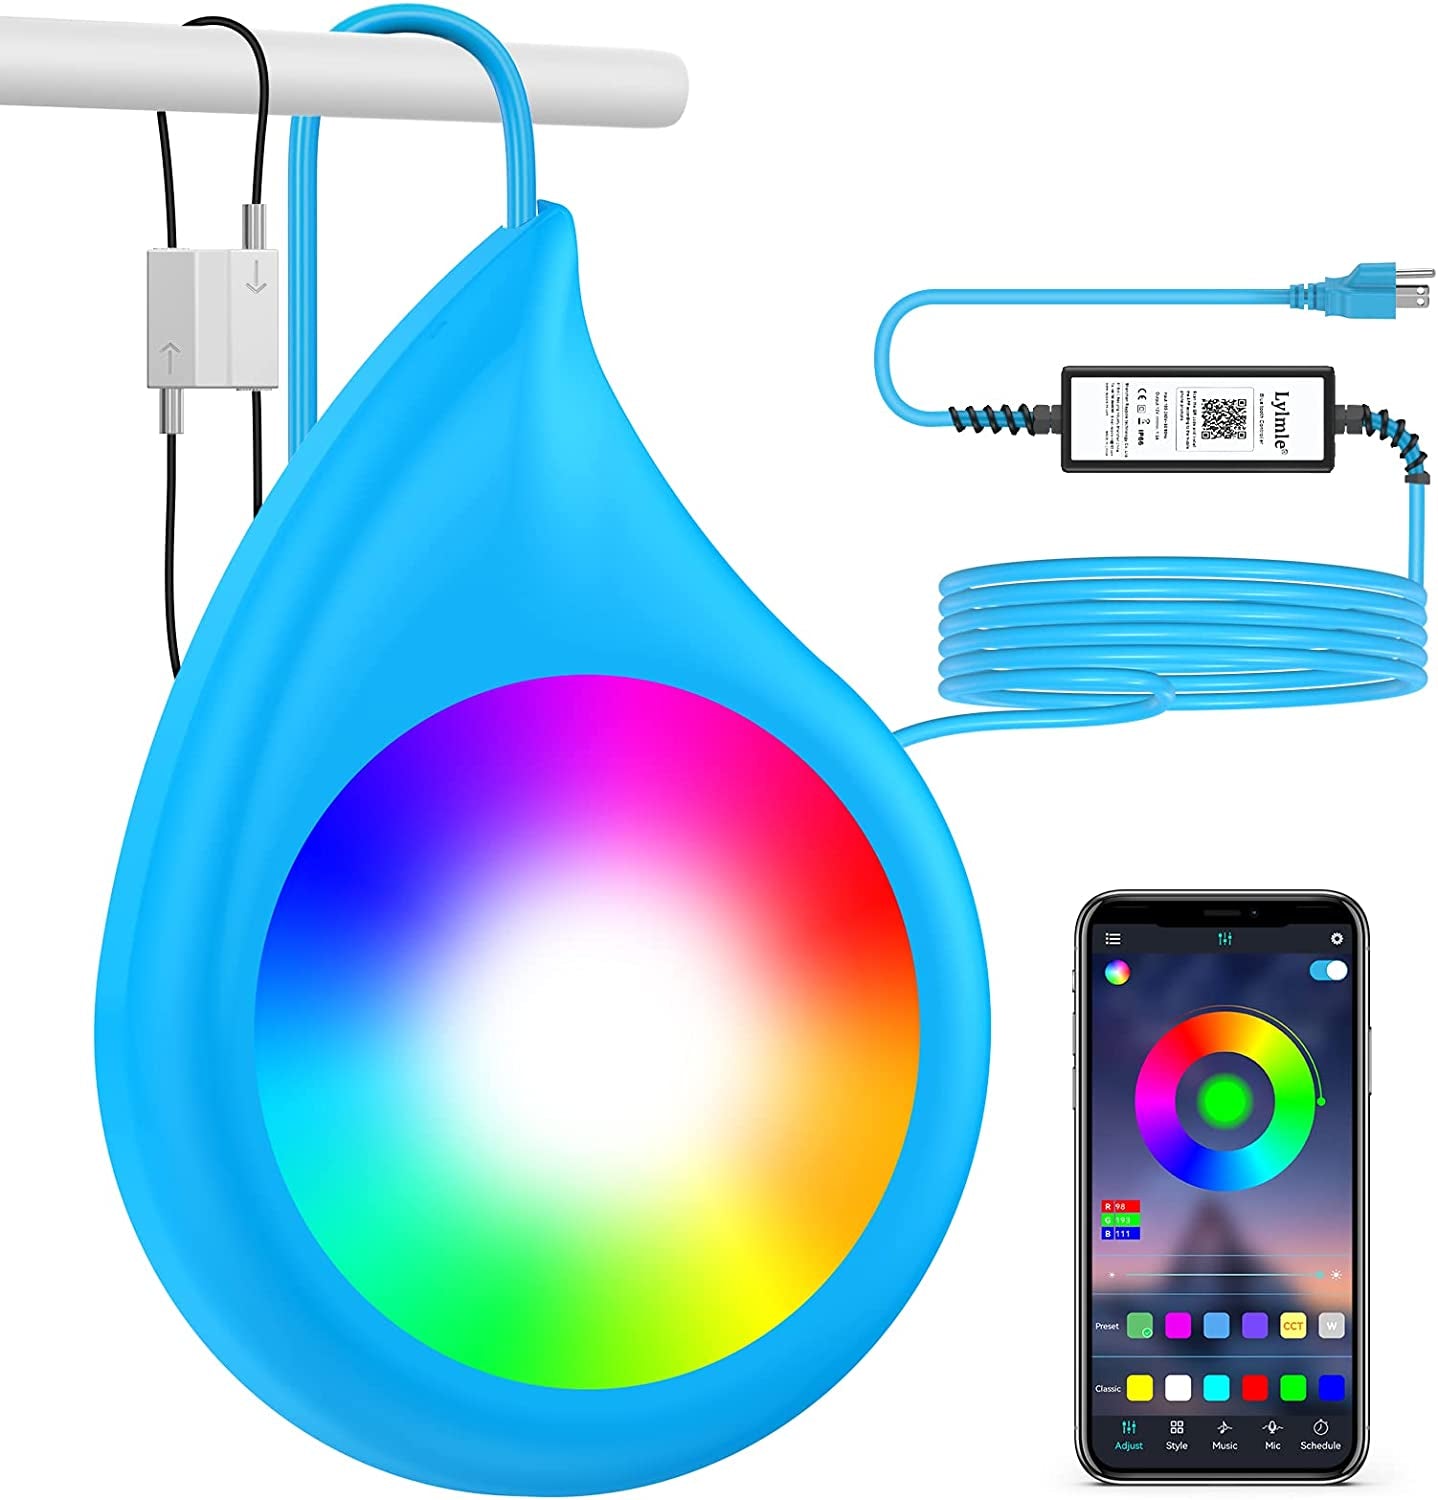 LyLmLe, Lylmle LED Pool Lights for Aboveground Pool, 10W Hanging RGB Color Changing Dimmable Underwater Submersible Lights with APP Control, Compatible for Steel Frame Pool, IP68 Waterproof,26Ft Cord,12V